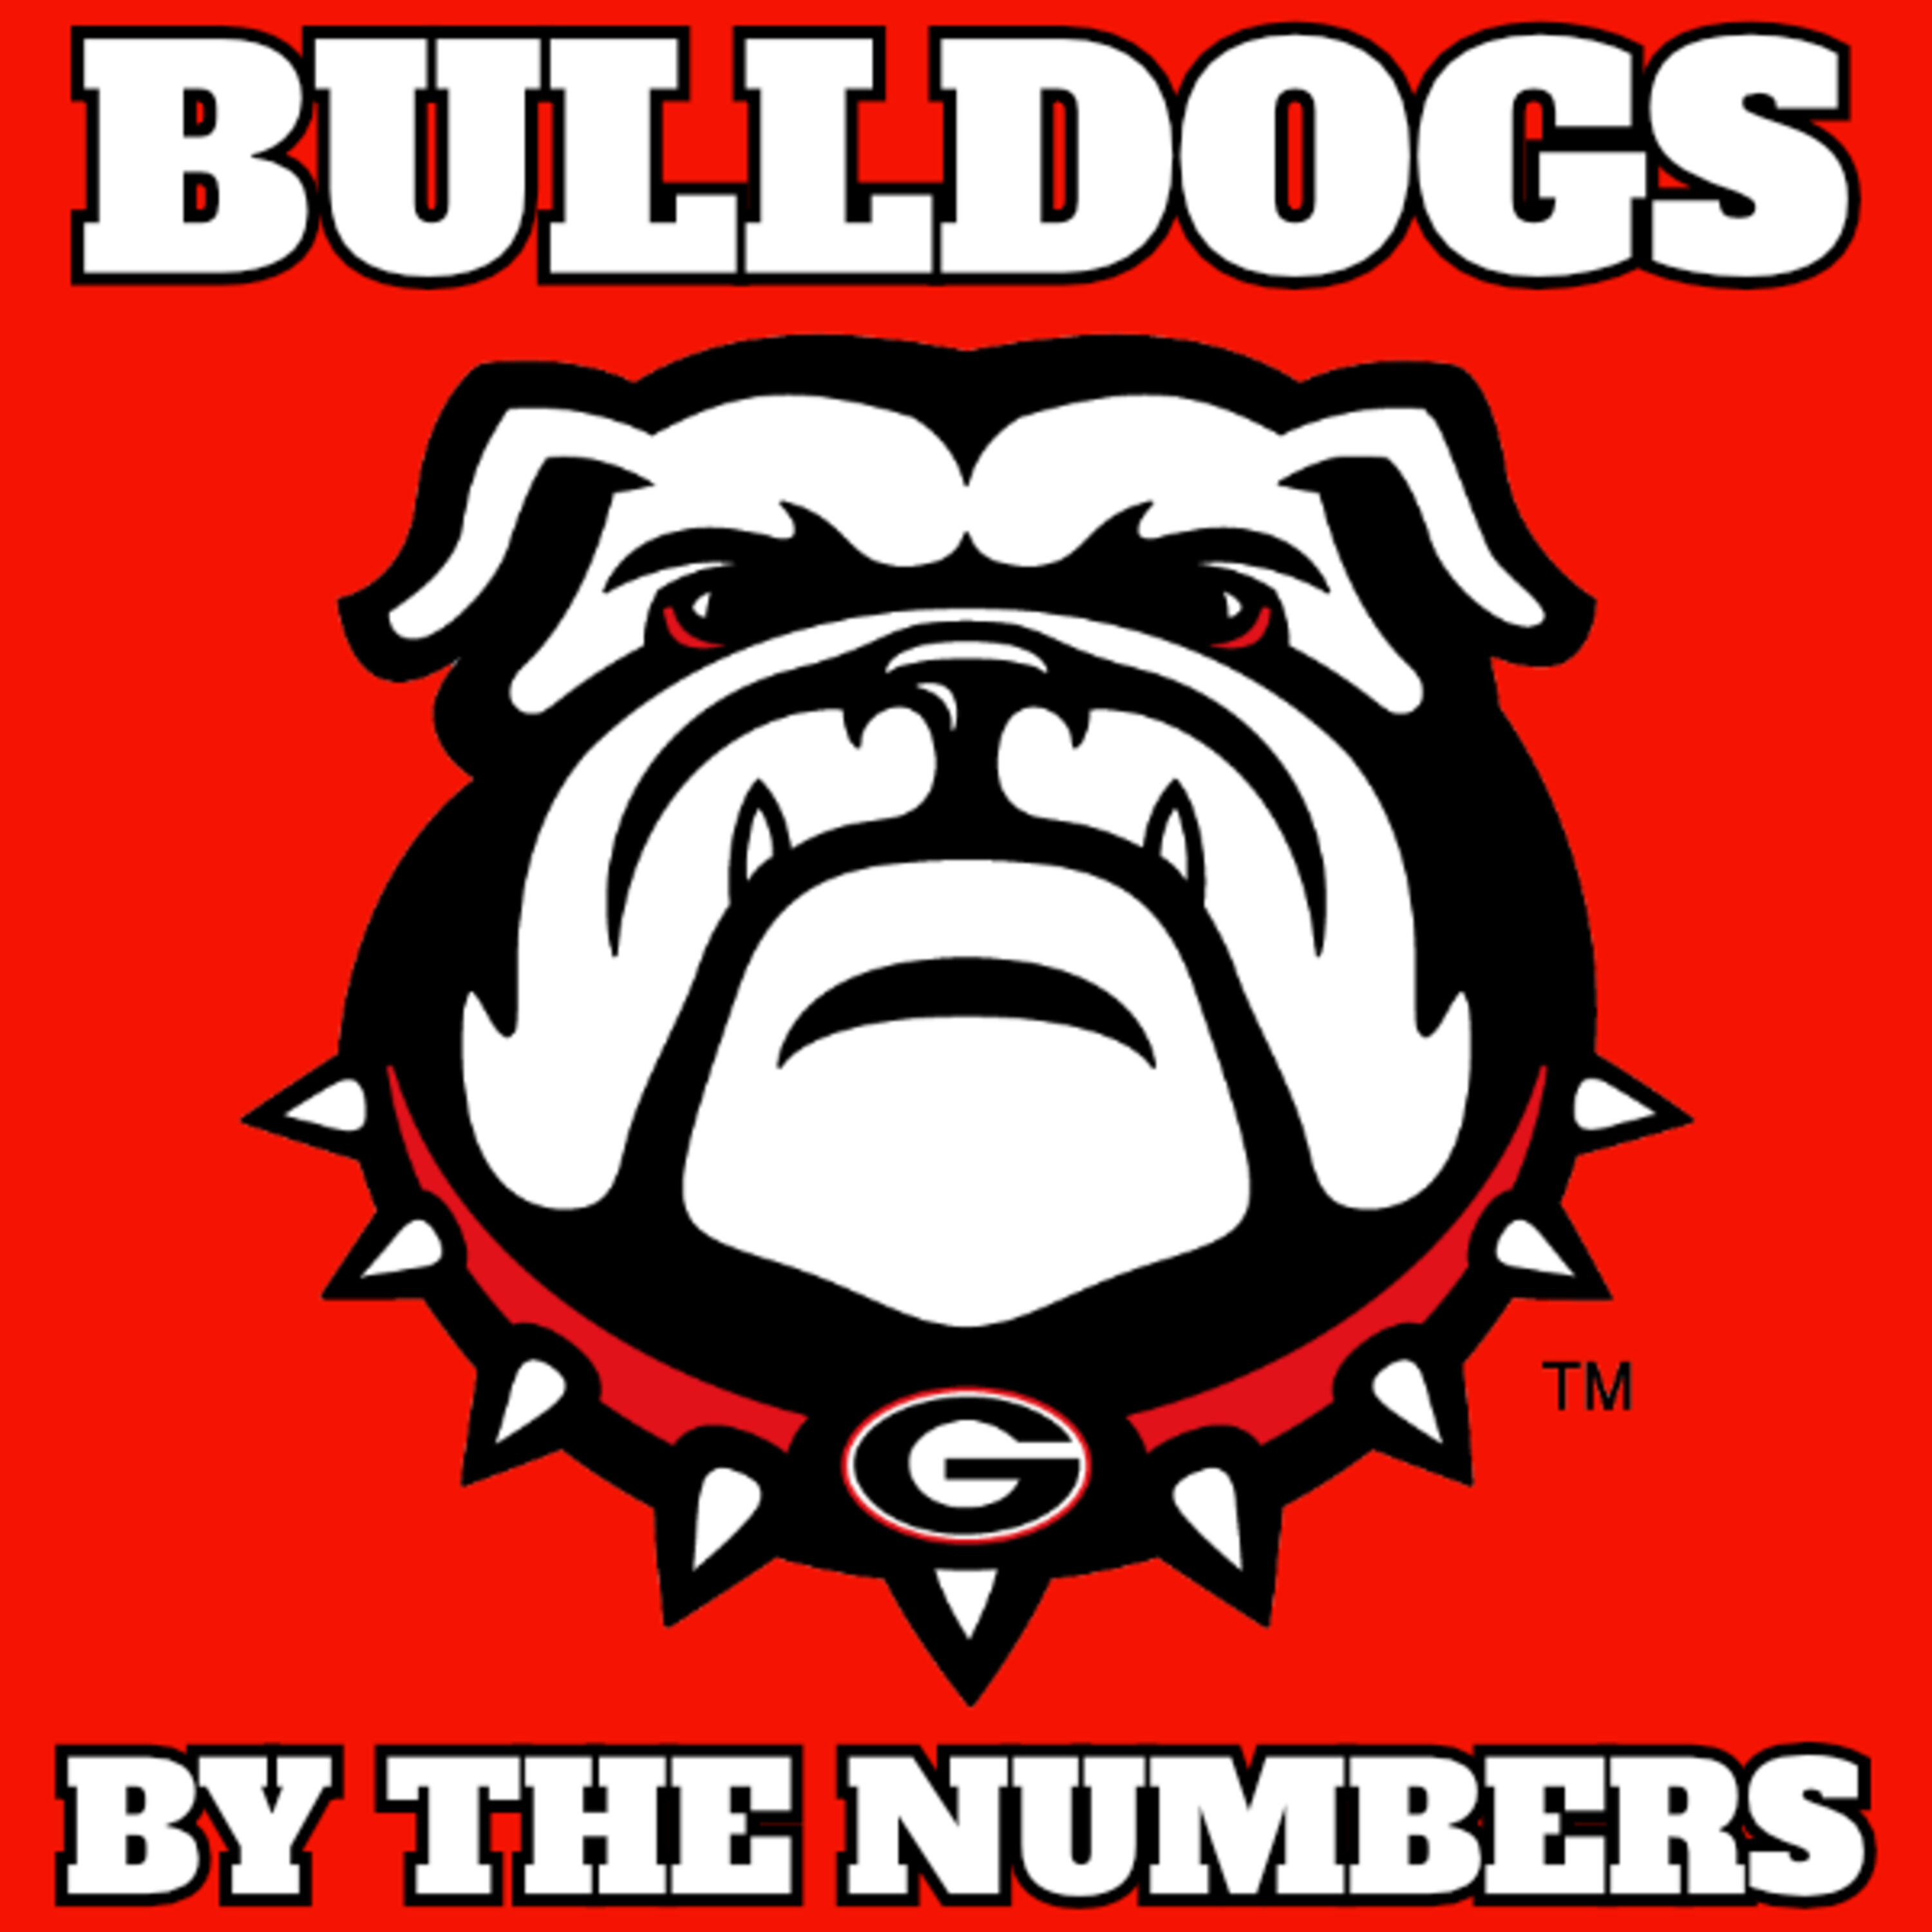 Bulldogs By The Numbers